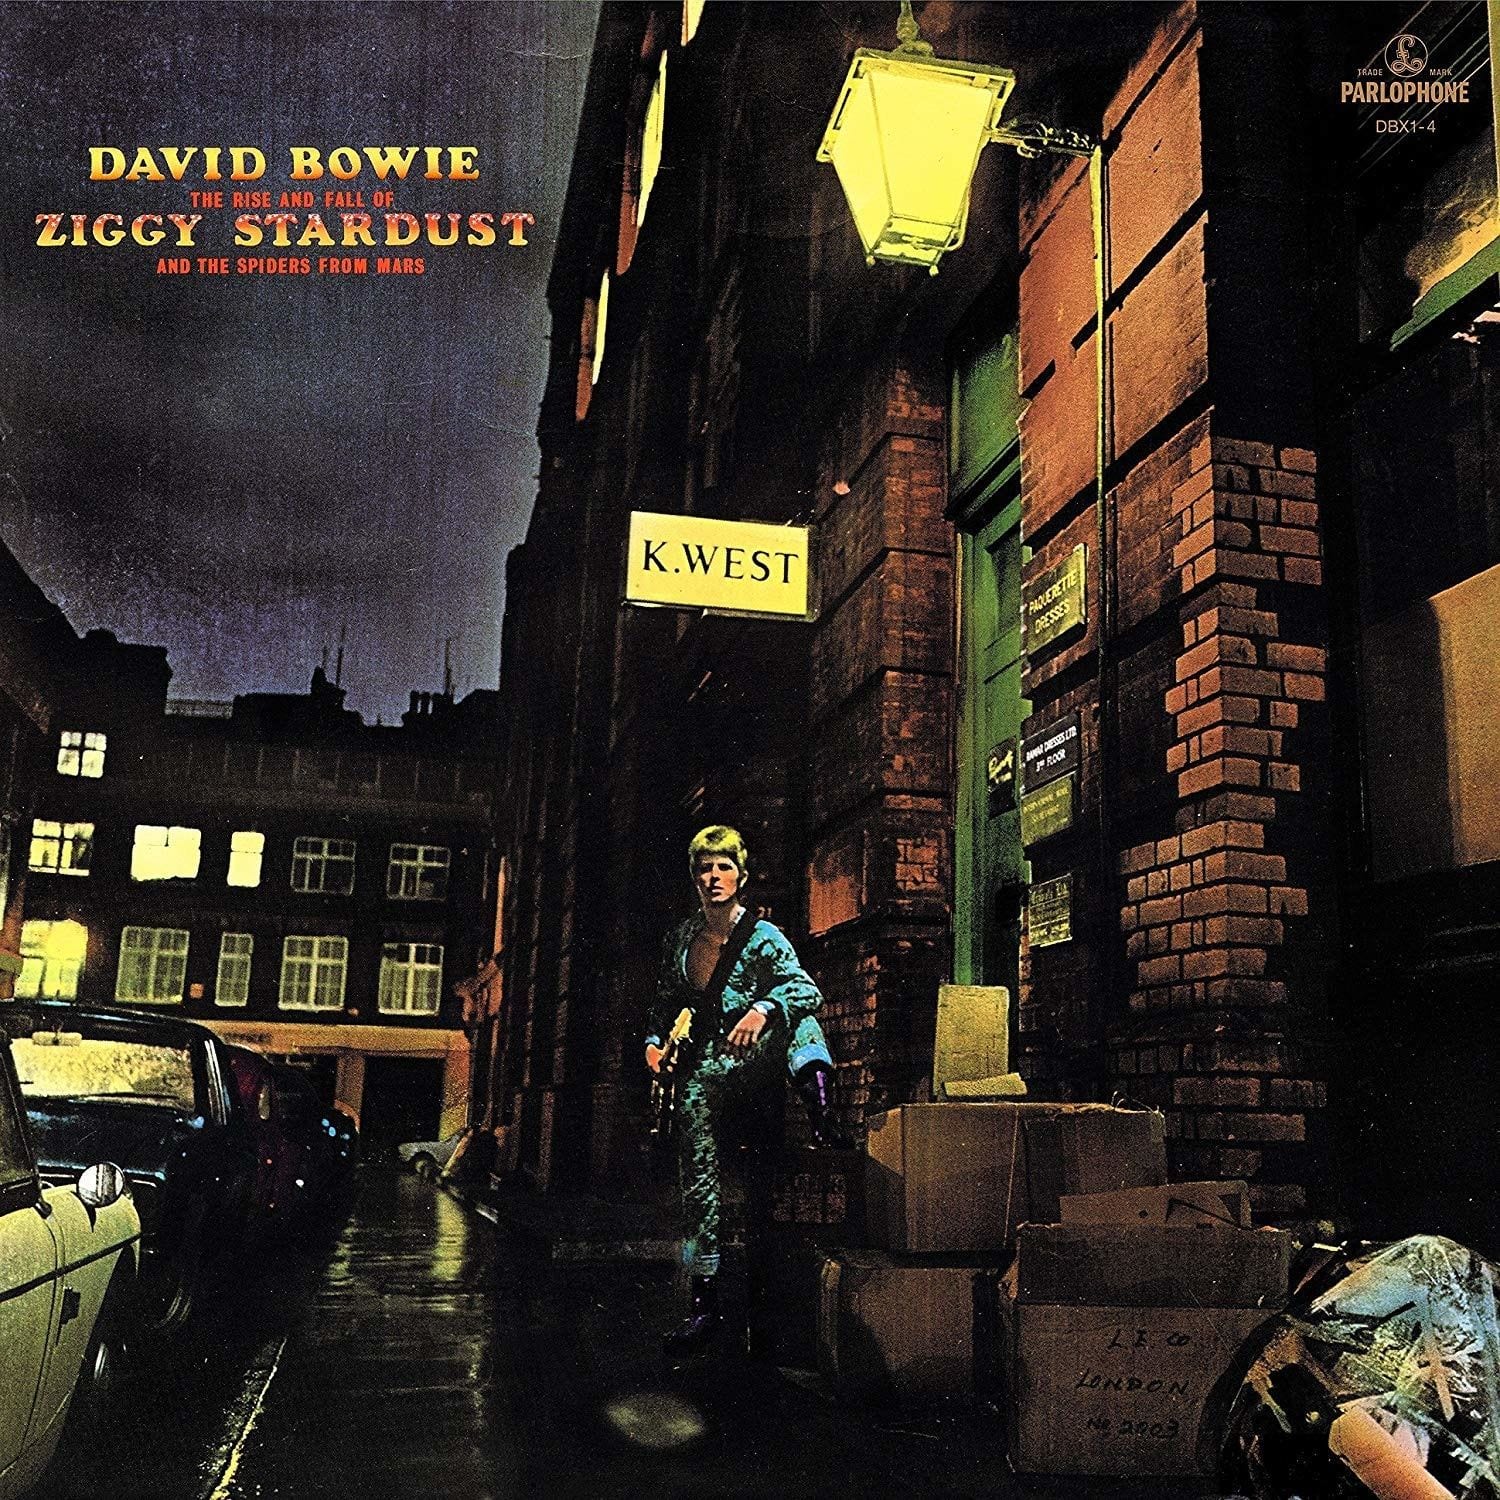 Counterbalance No. 16: David Bowie – ‘The Rise and Fall of Ziggy Stardust and the Spiders from Mars’